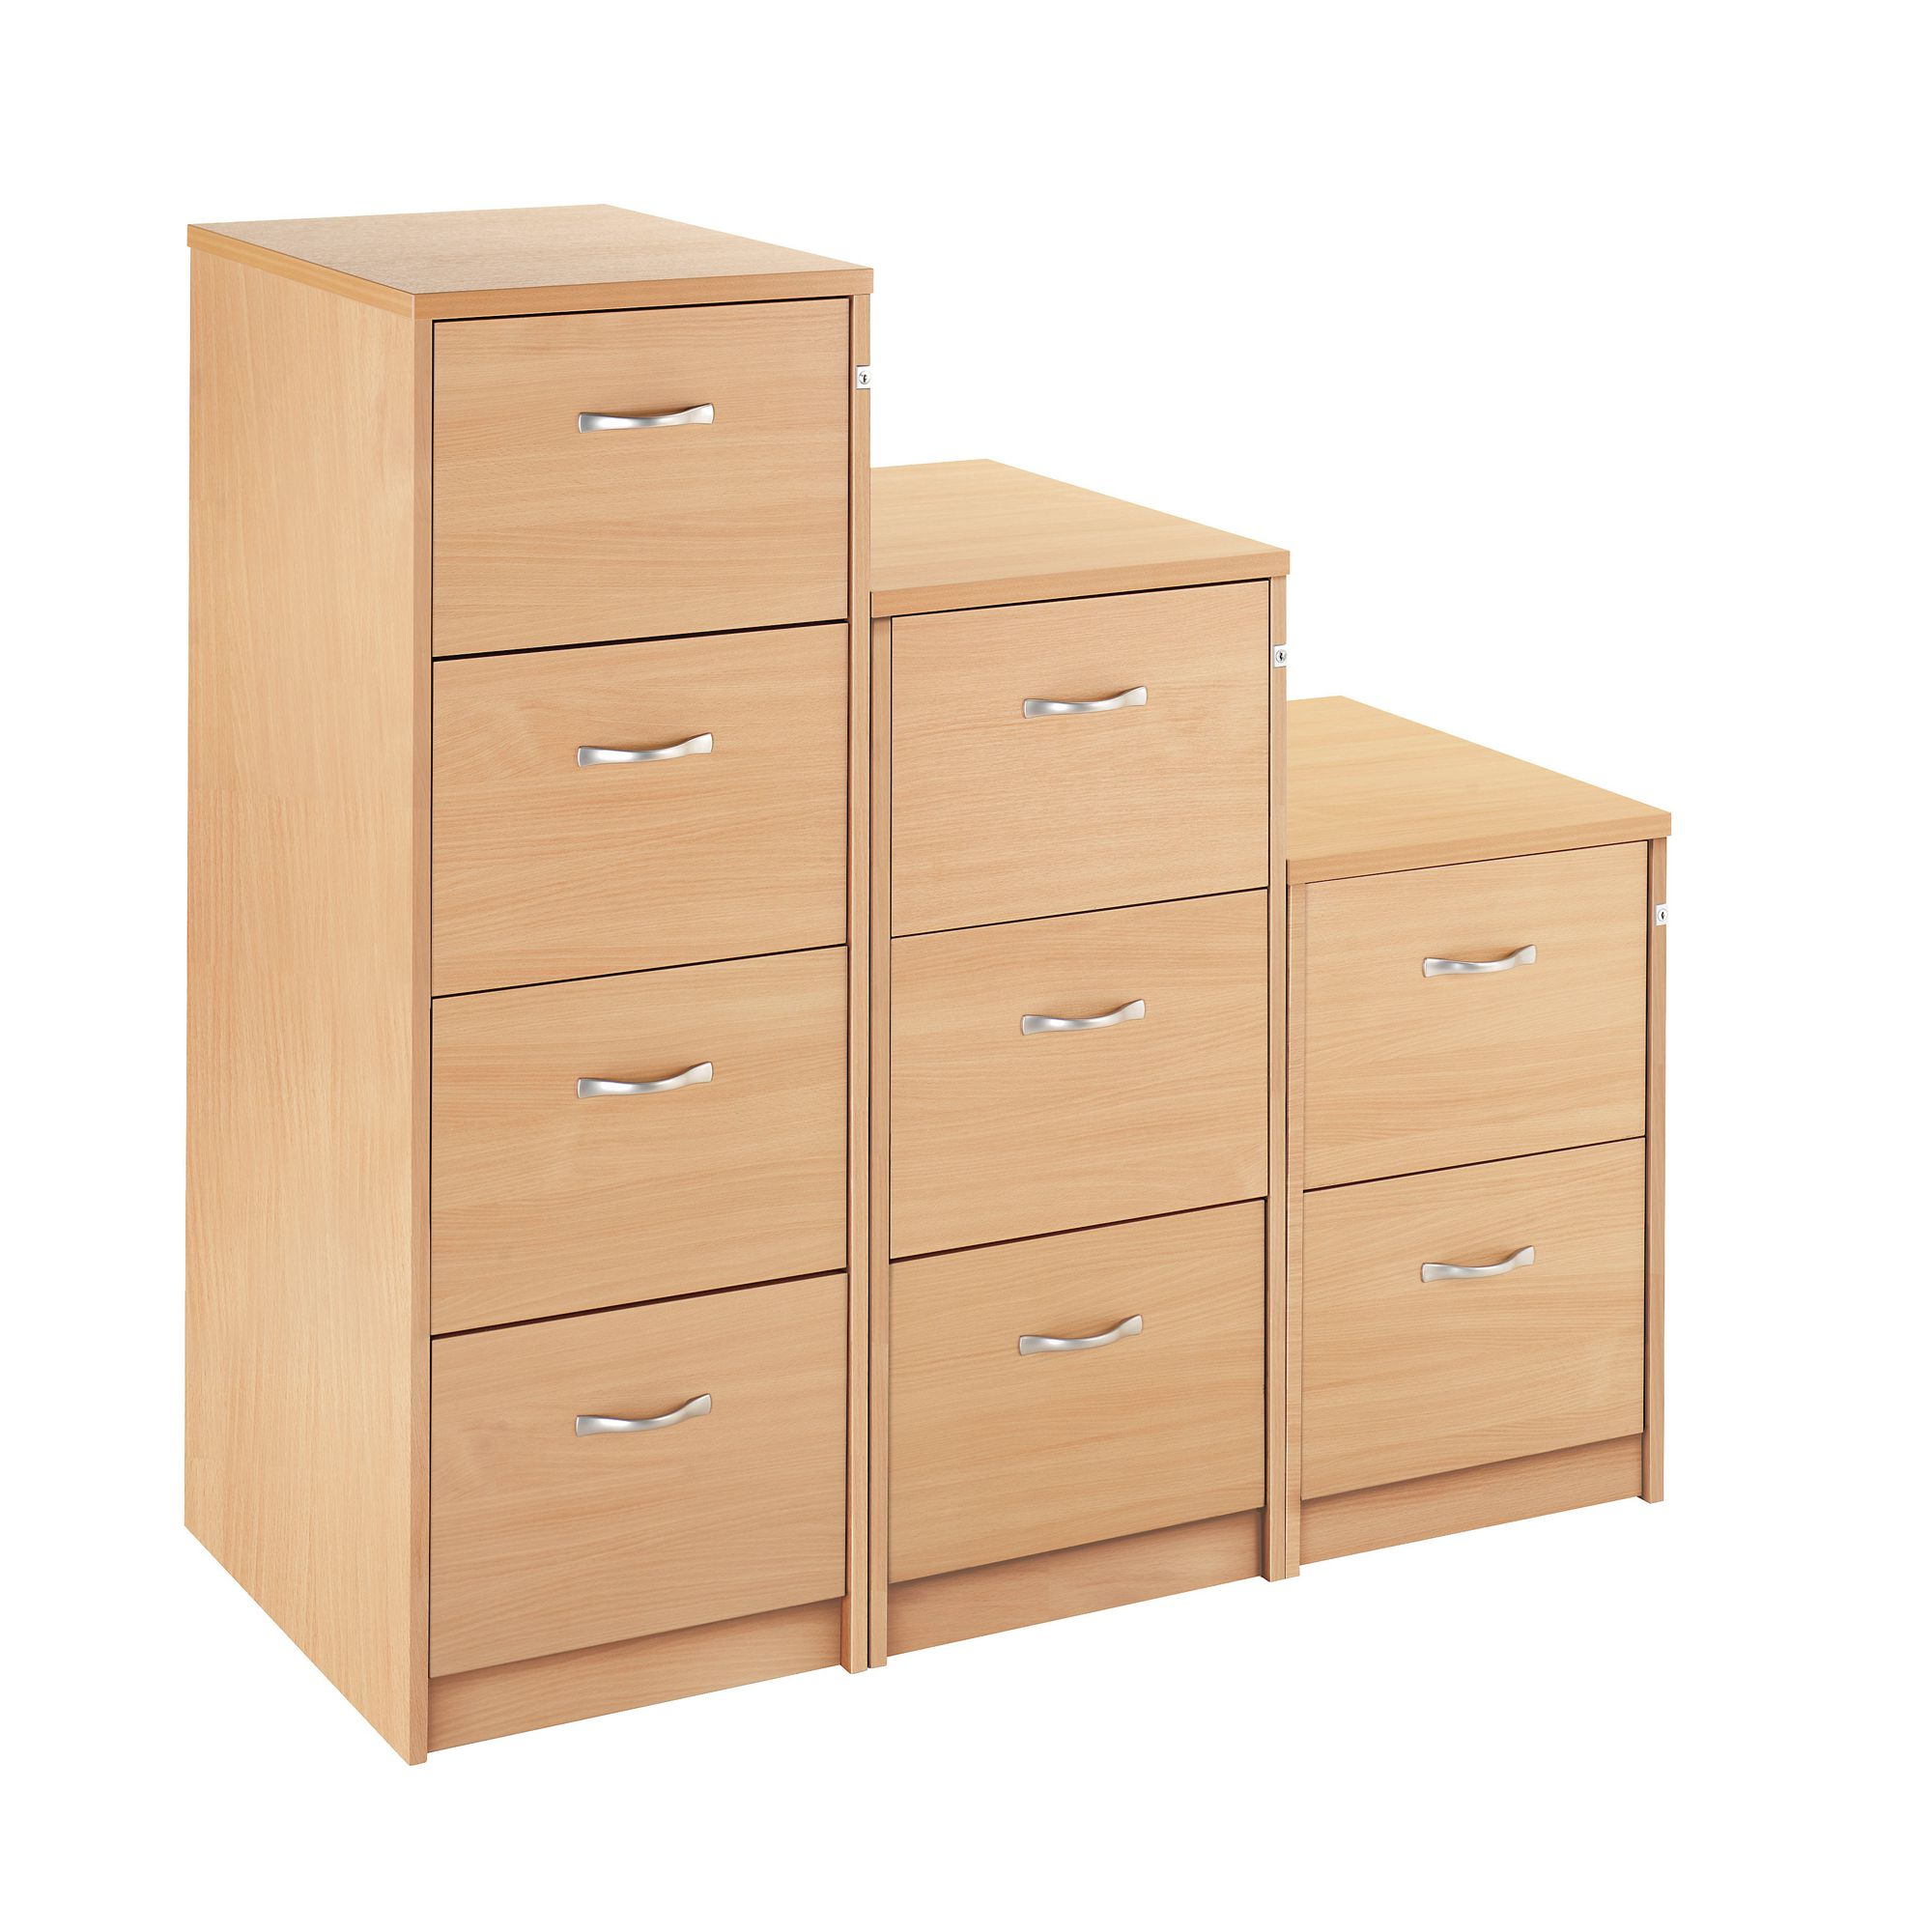 Classmates Wooden Filing Cabinet 4 Drawer Hope Education intended for dimensions 2000 X 2000